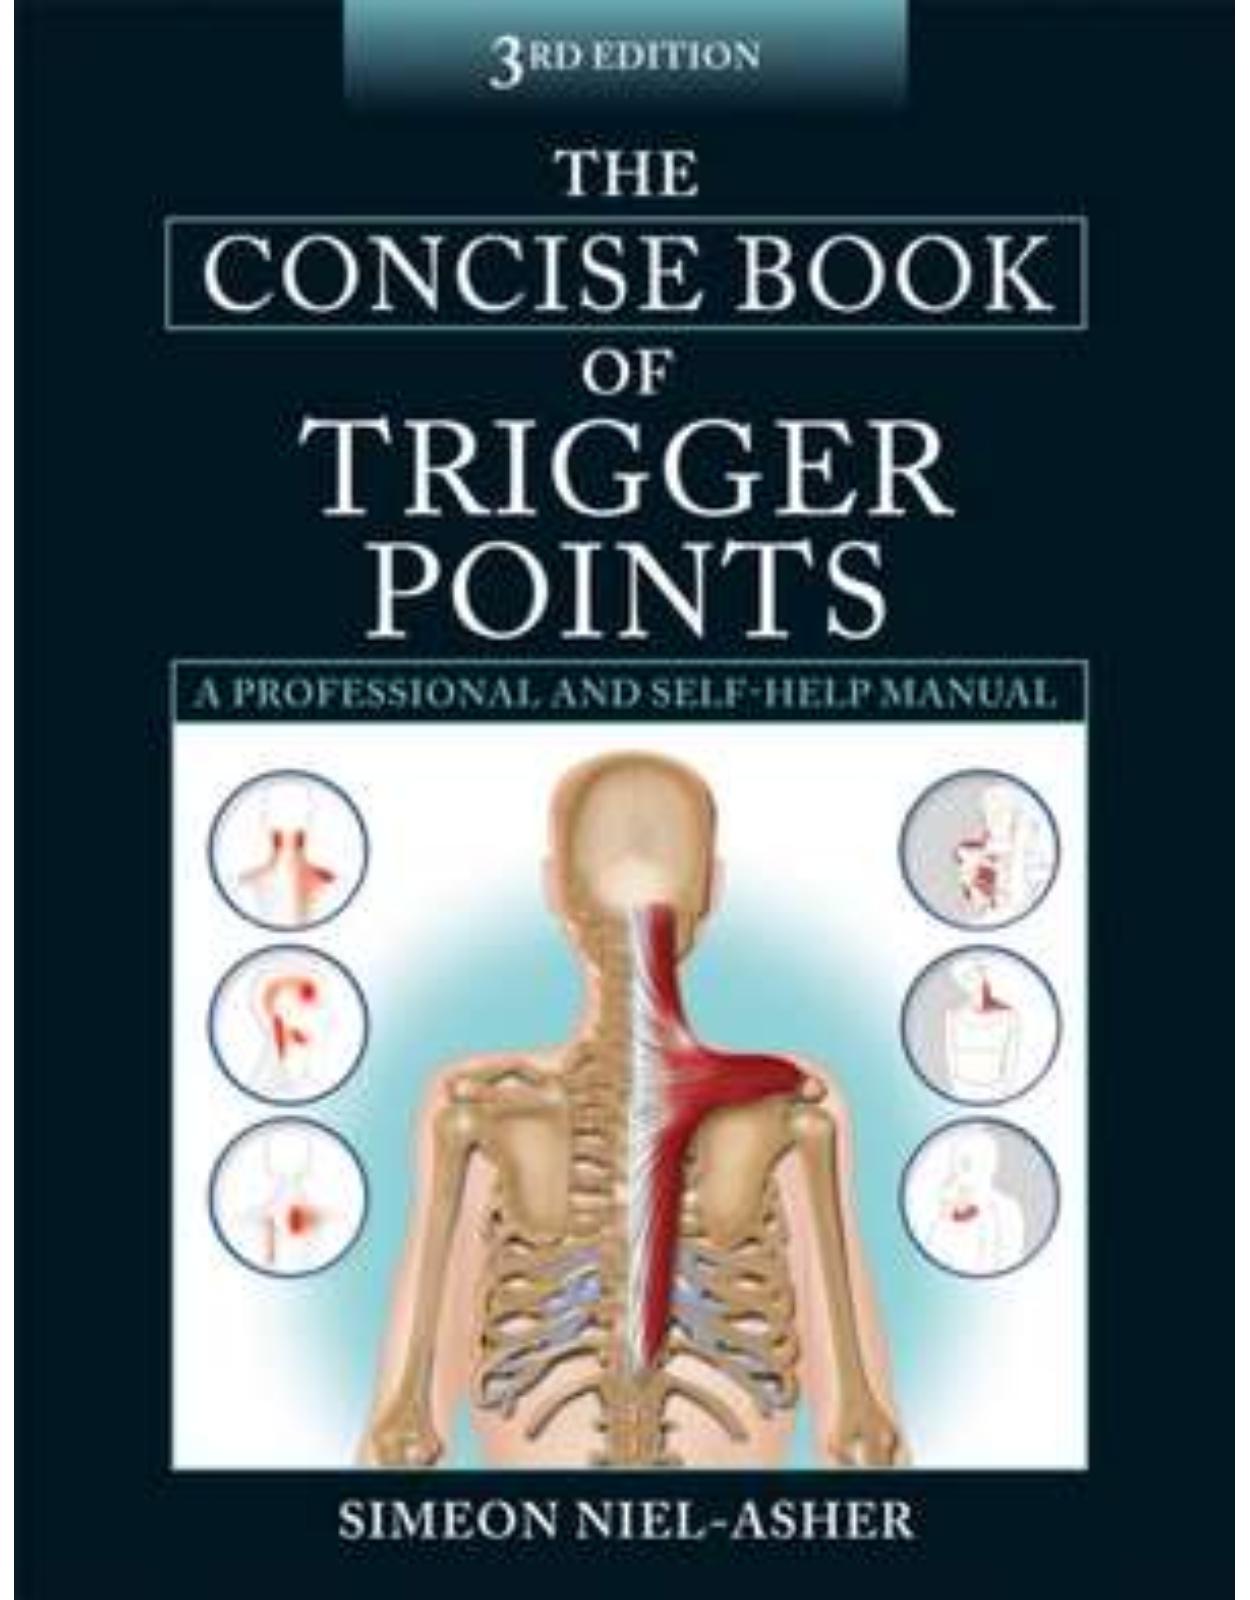 Concise Book of Trigger Points 3rd